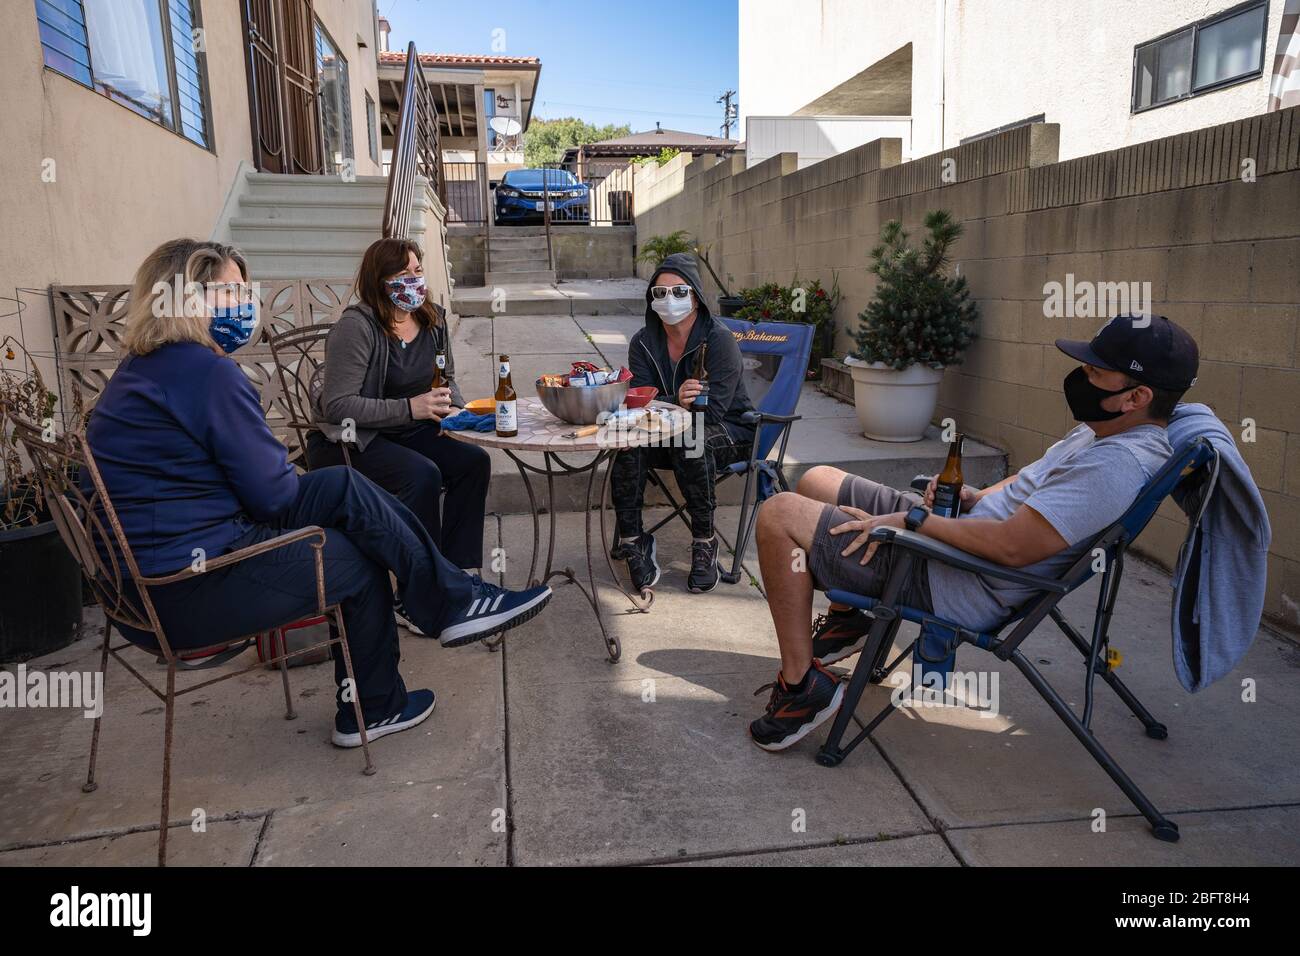 Social distancing party with neighbors in Los Angeles, CA wearing face masks during Covid-19 crisis Stock Photo